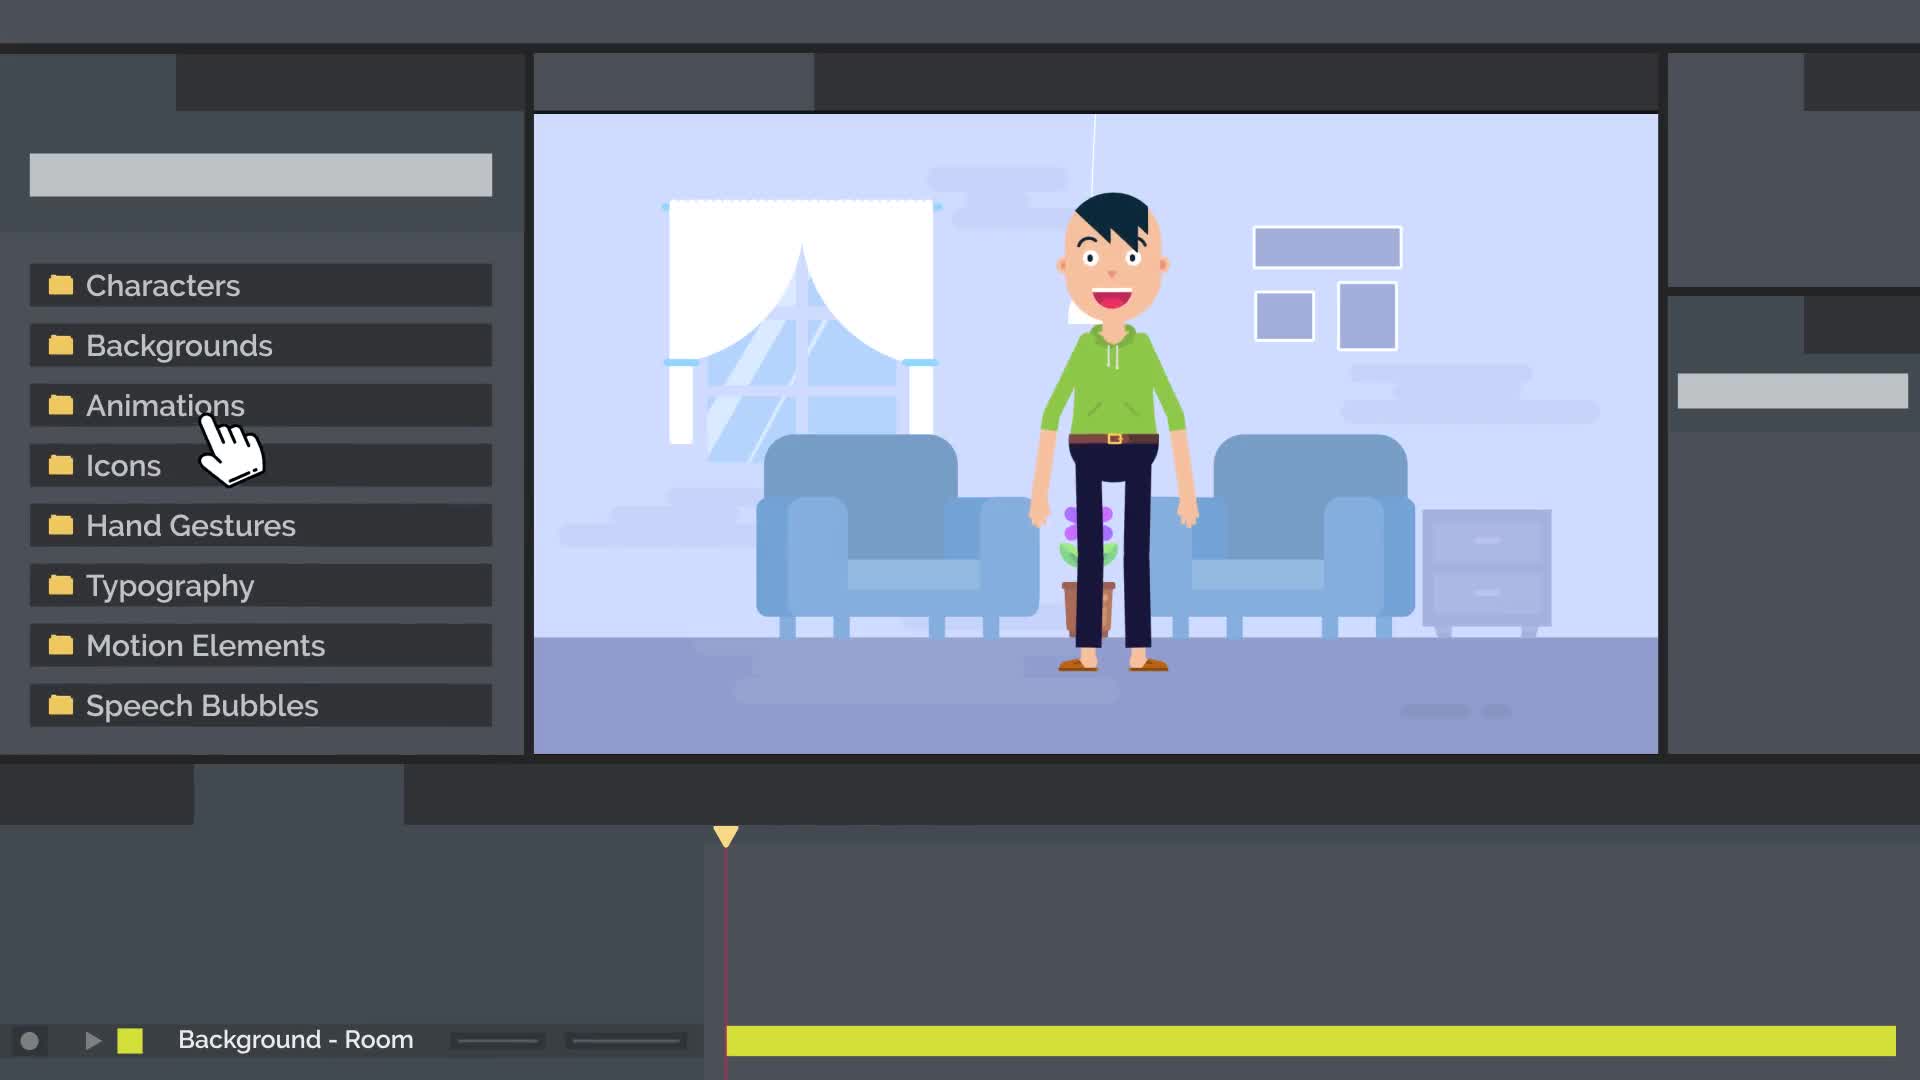 explainer video toolkit 2 download